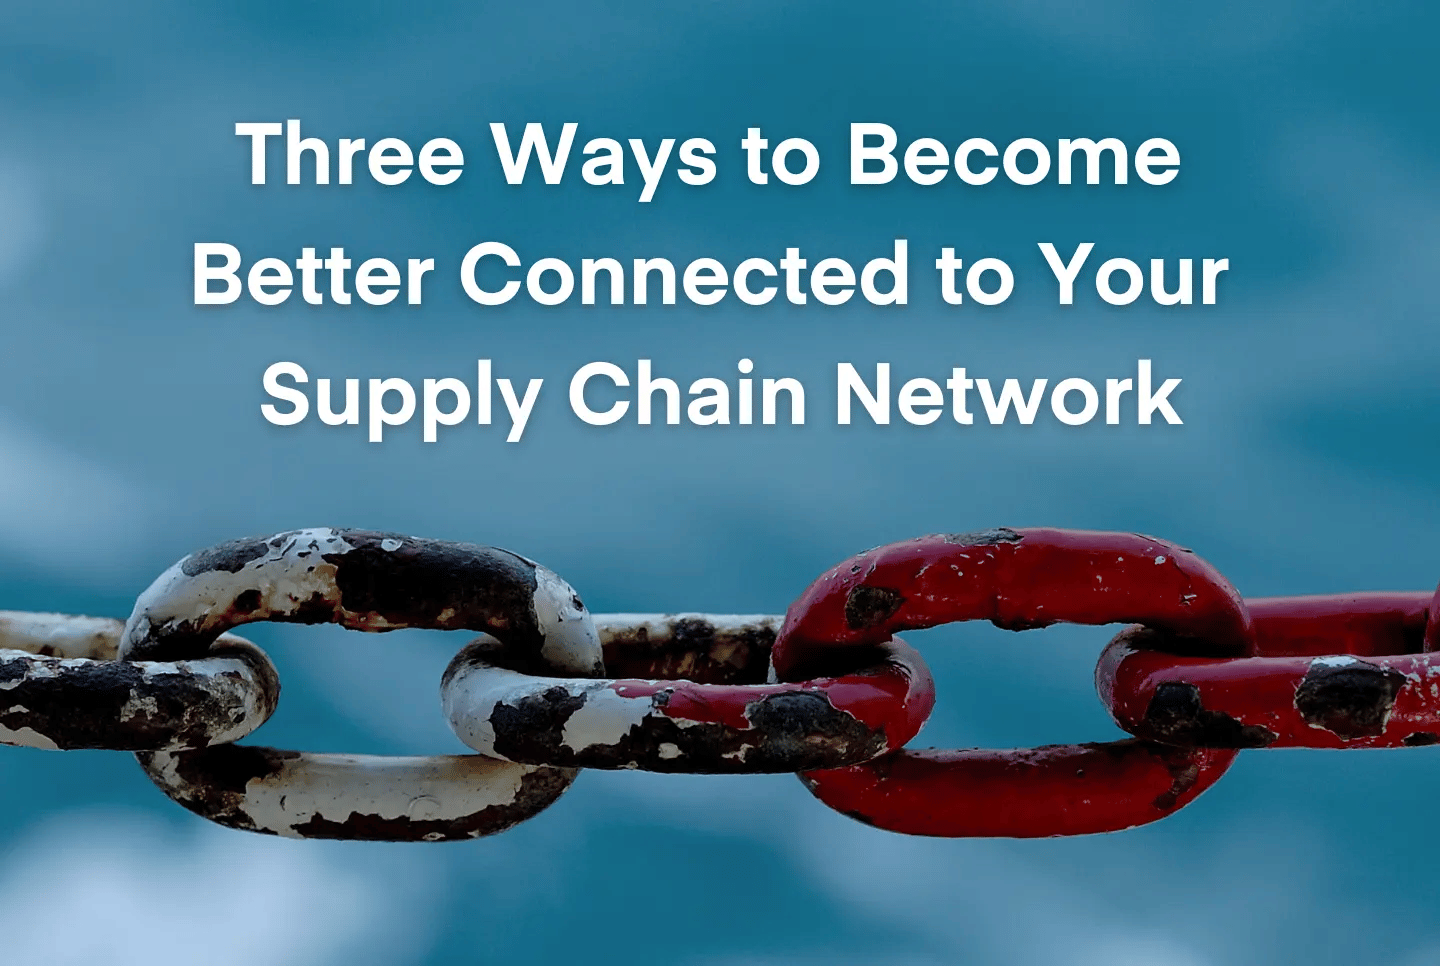 Chain links below the text "Three Ways to Become Better Connected to Your Supply Chain Network"